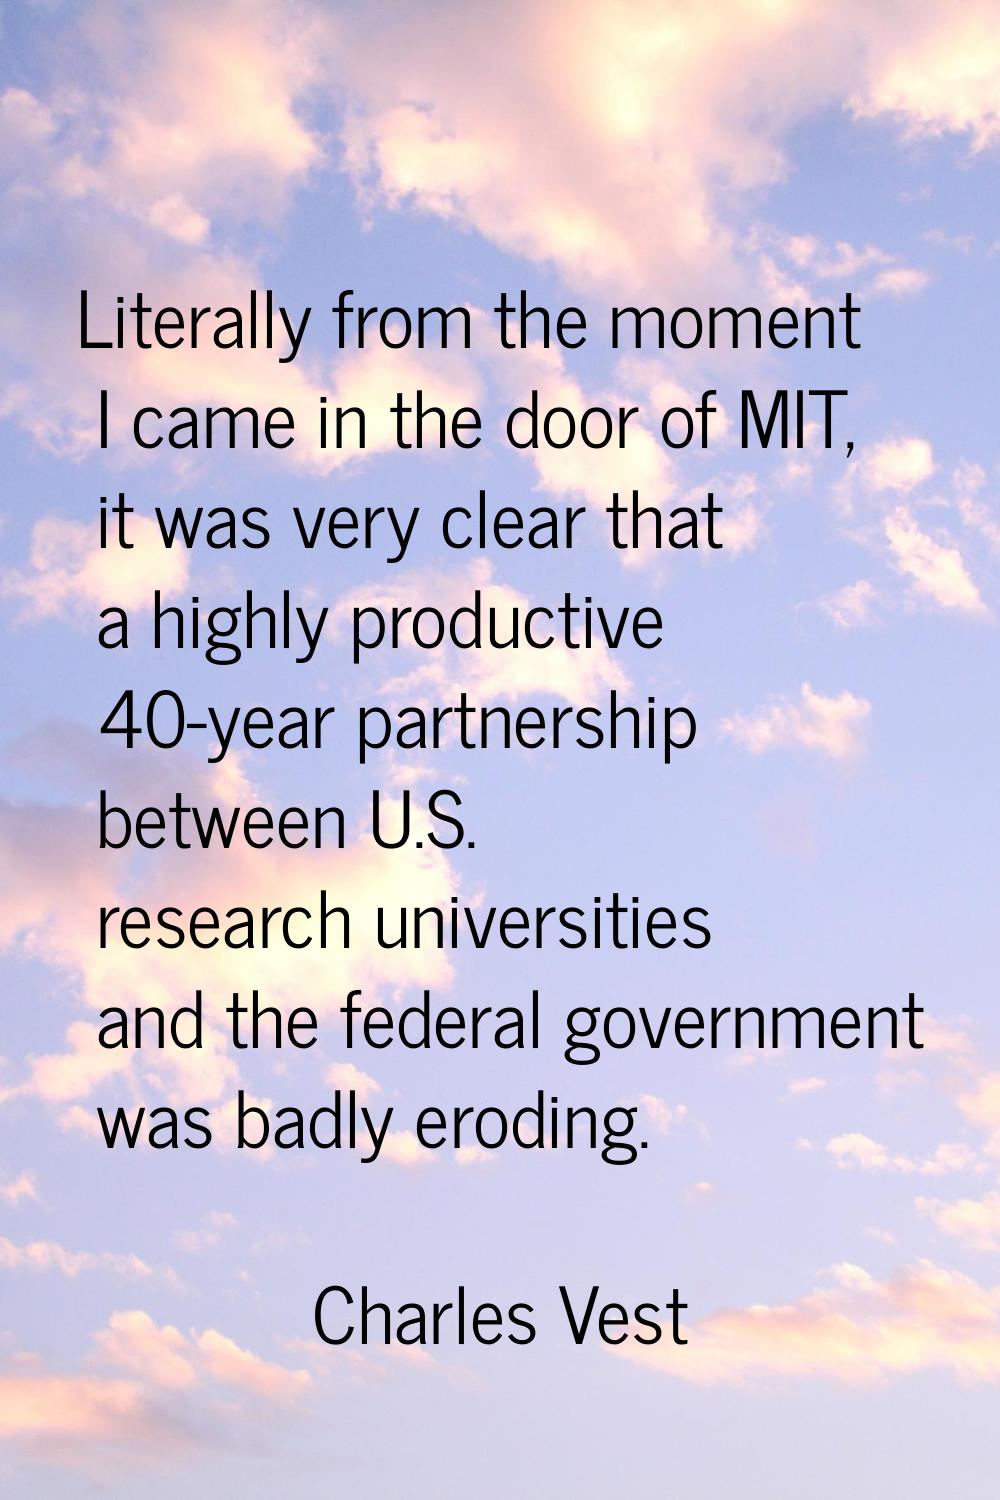 Literally from the moment I came in the door of MIT, it was very clear that a highly productive 40-